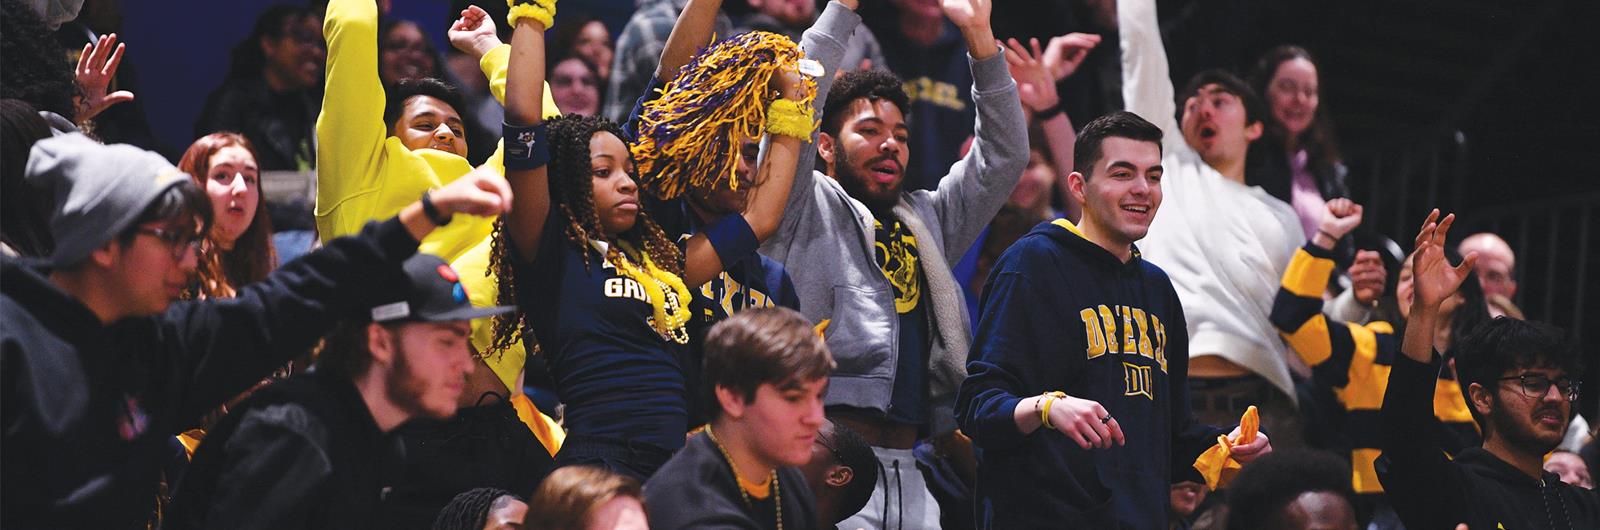 Drexel fans cheering at a Basketball game. 